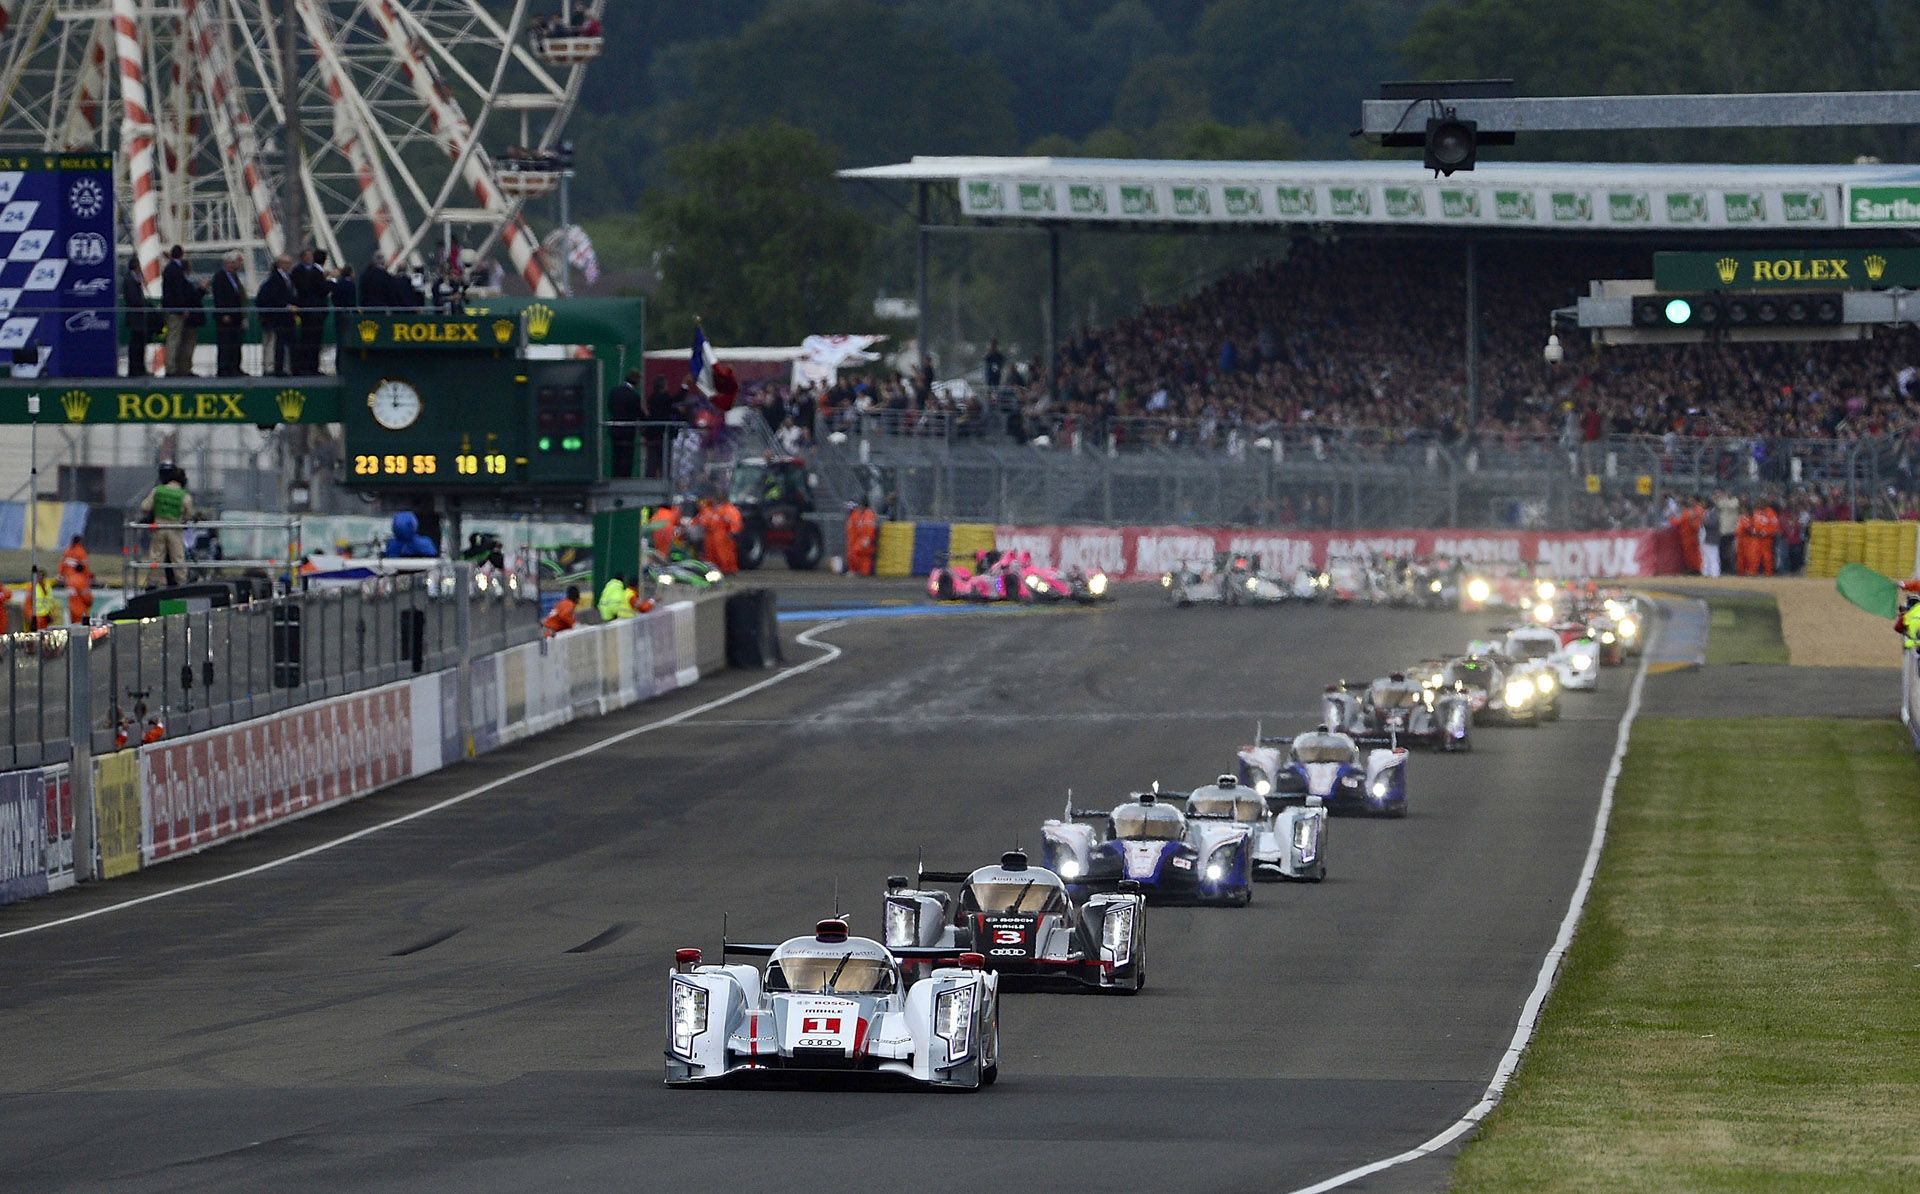 24 Hours of Le Mans Photo Gallery